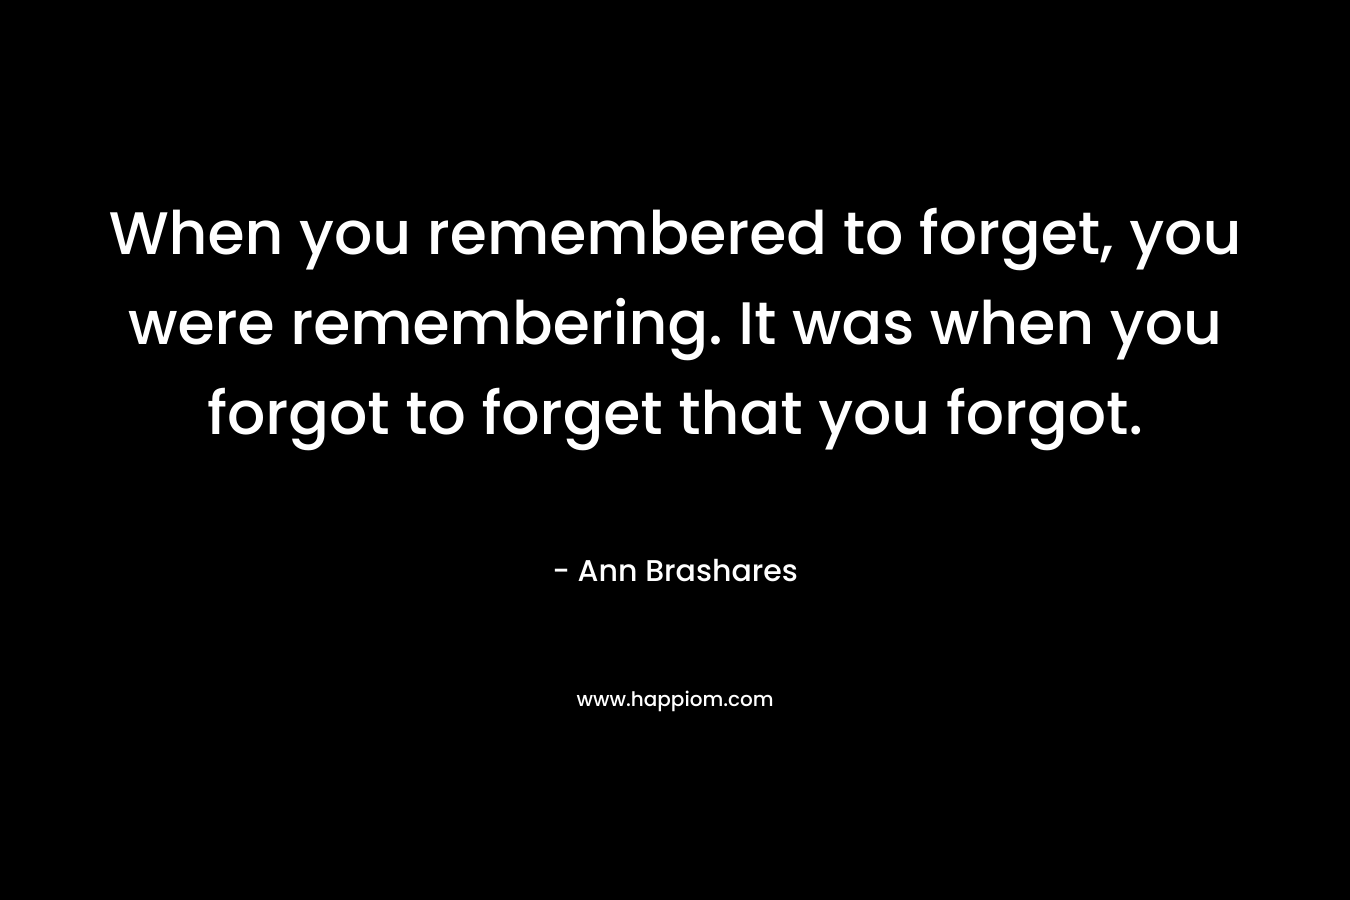 When you remembered to forget, you were remembering. It was when you forgot to forget that you forgot. 